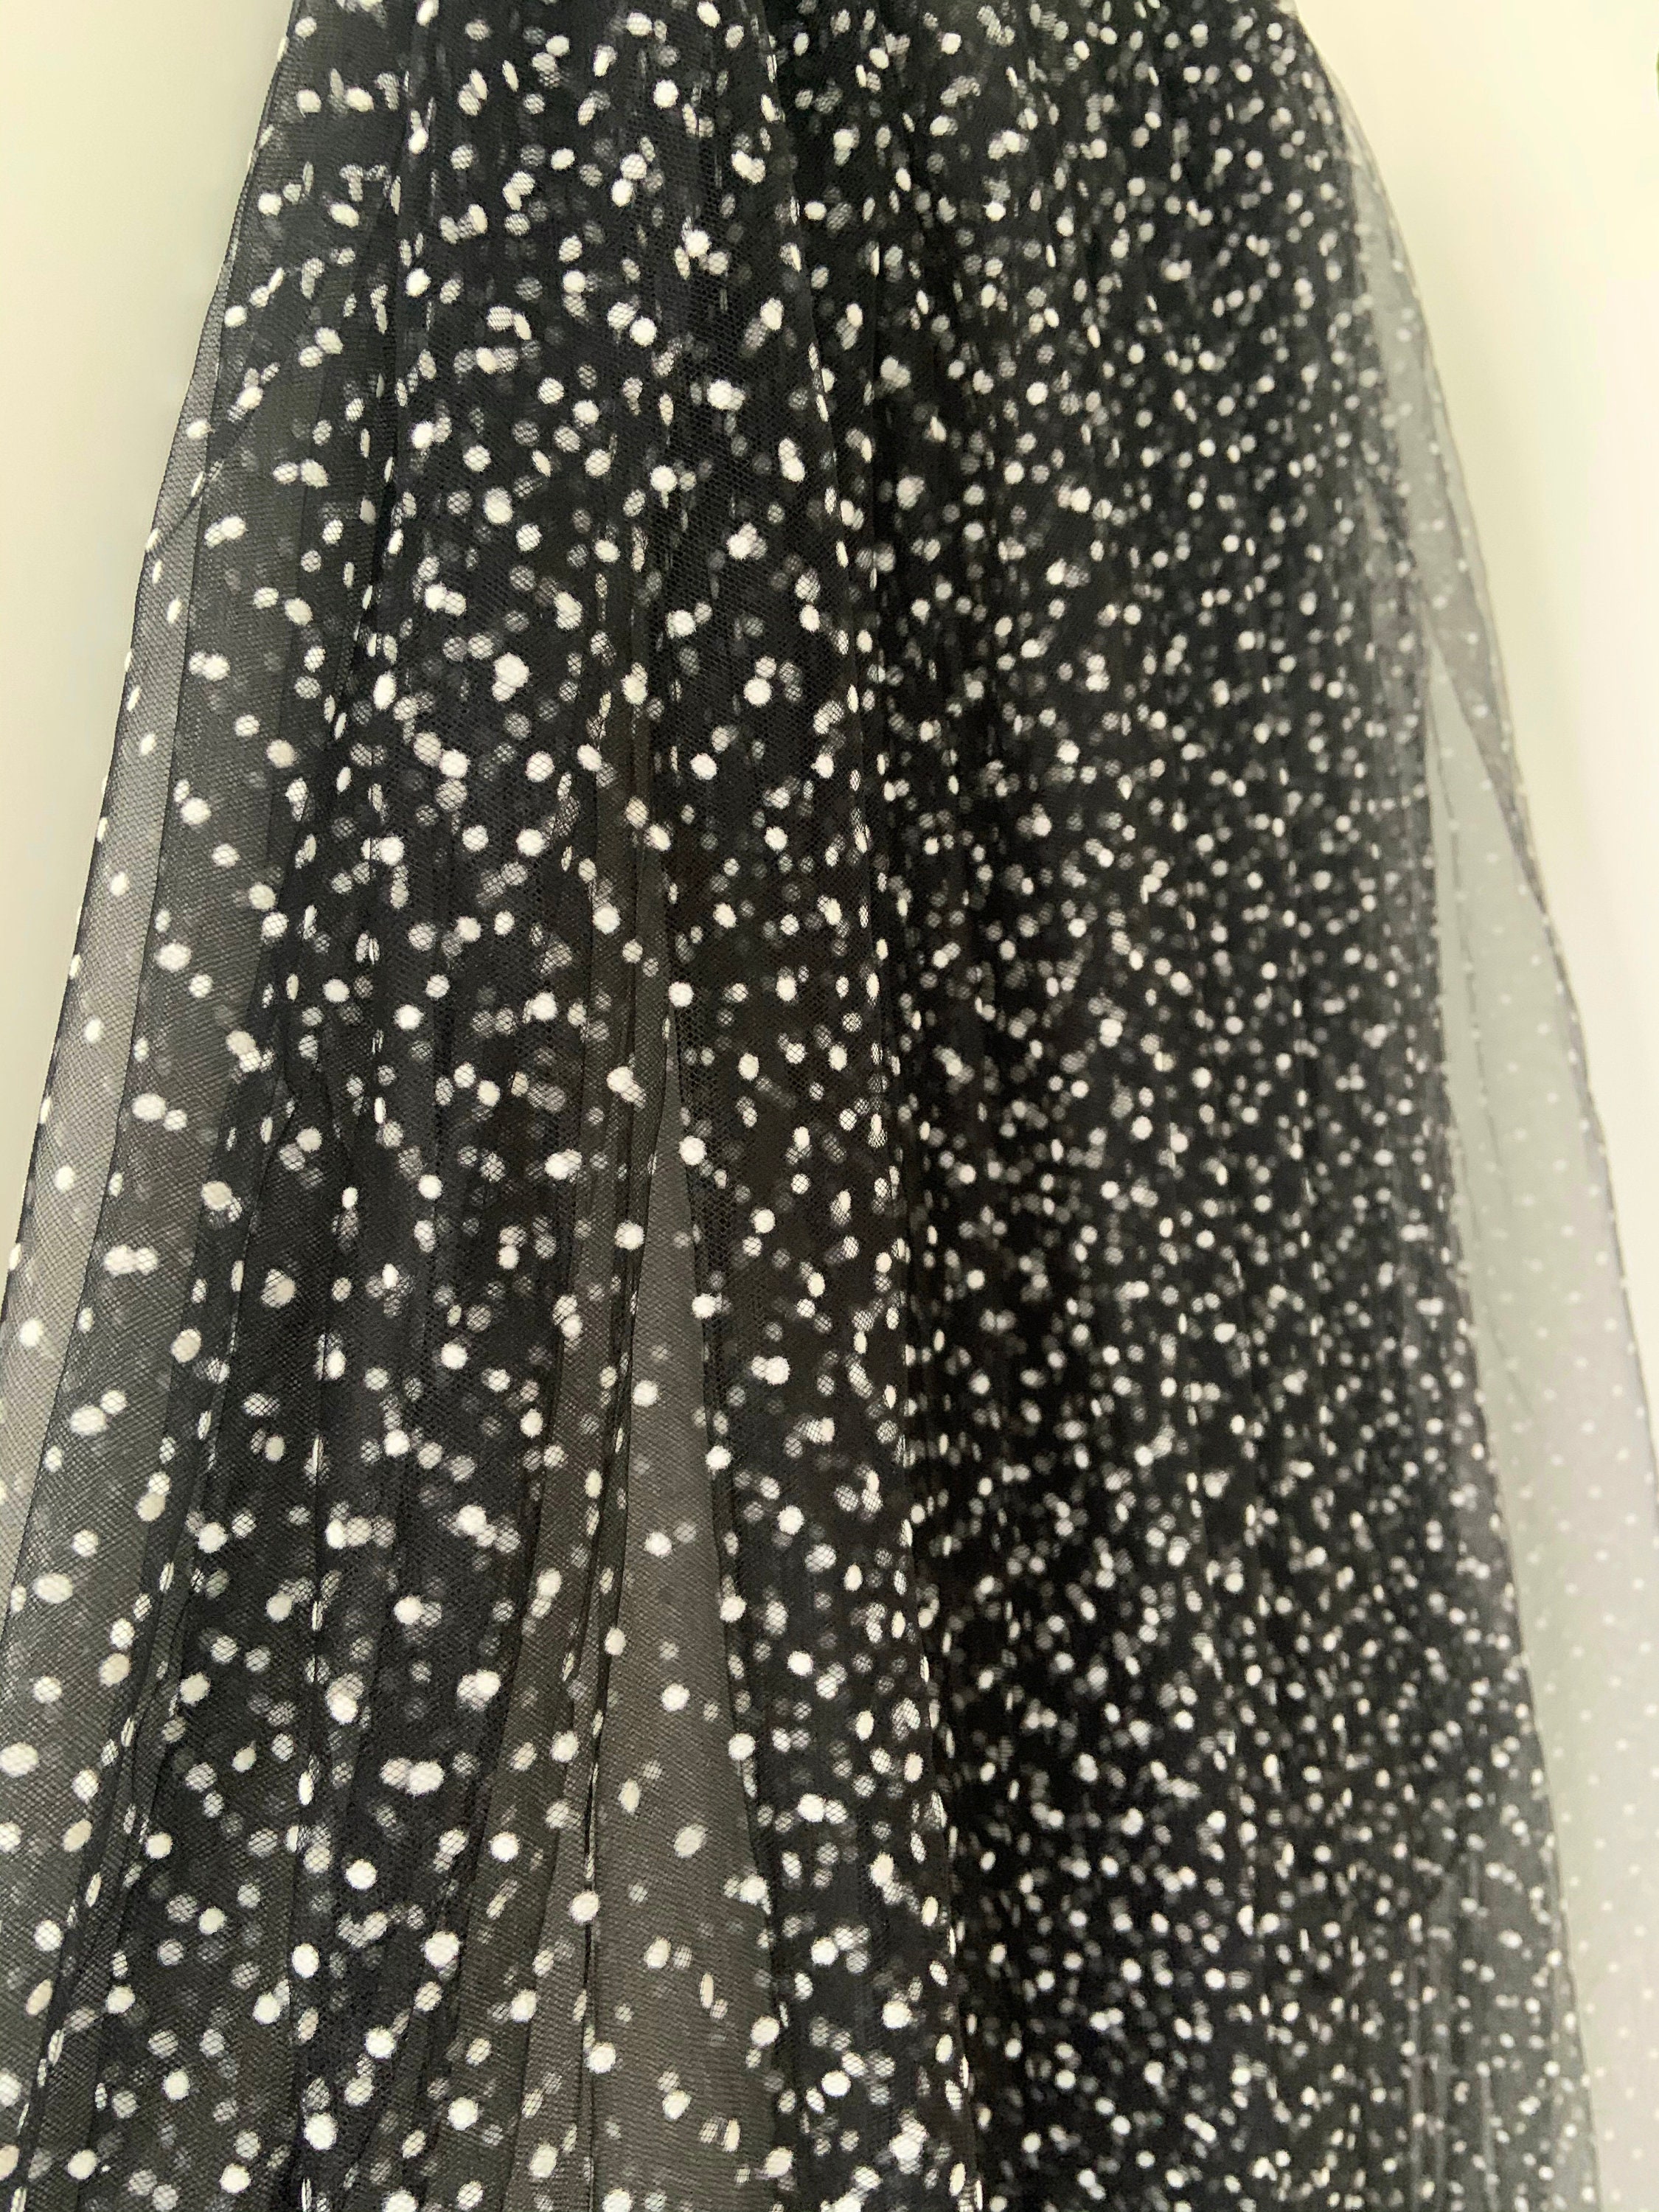 Off White Tulle Lace Fabric With Black Polka Dots - Etsy